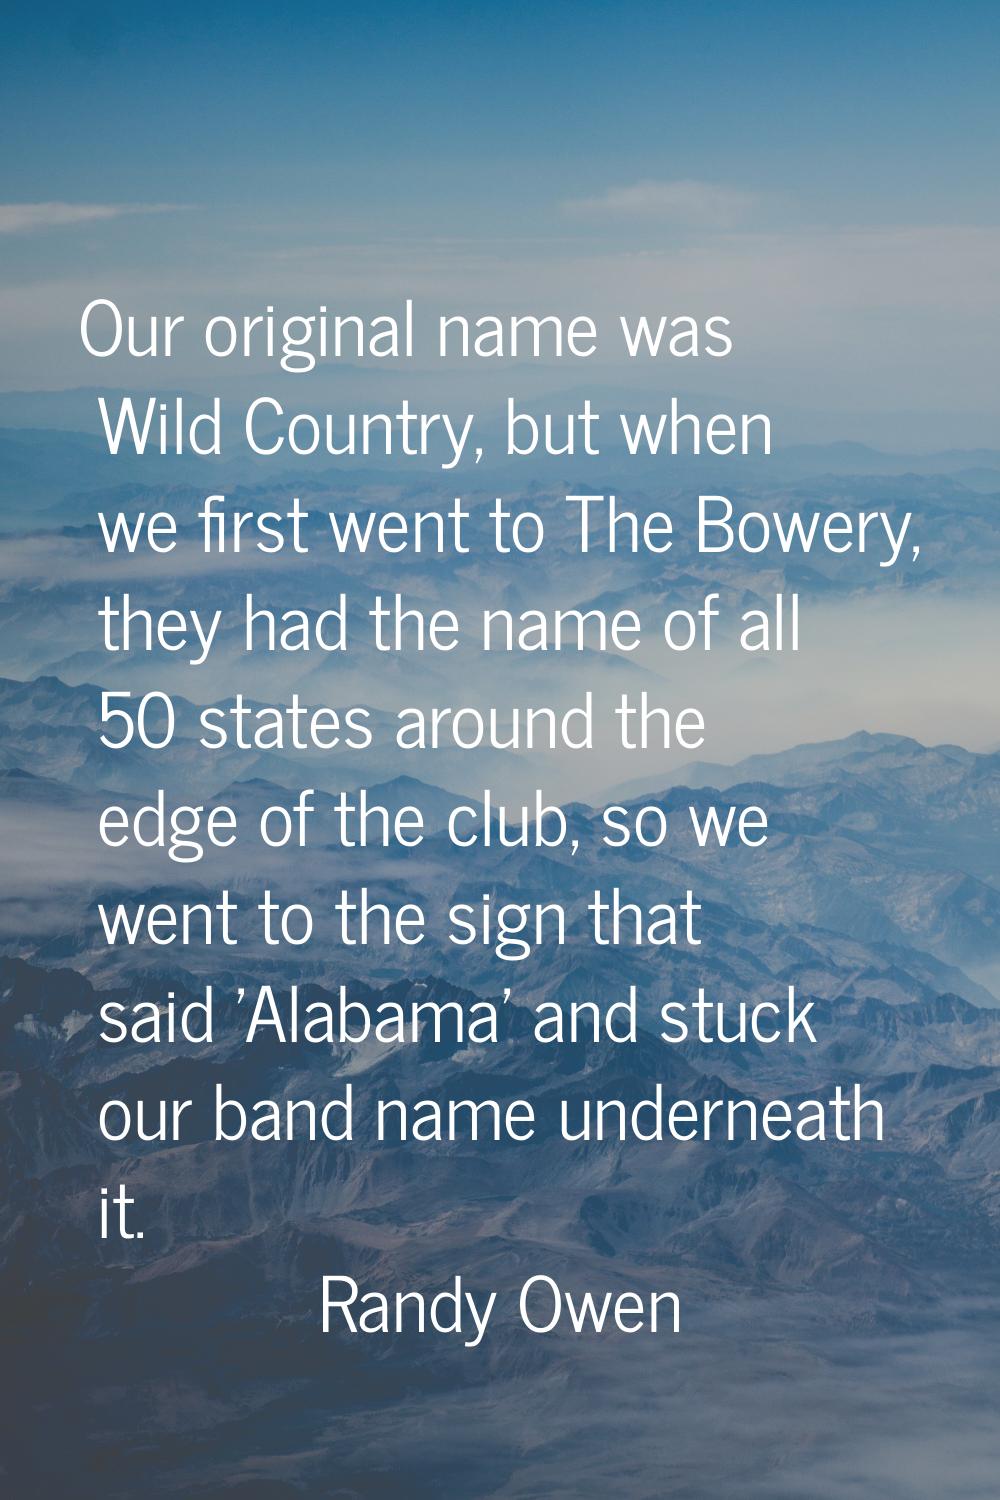 Our original name was Wild Country, but when we first went to The Bowery, they had the name of all 